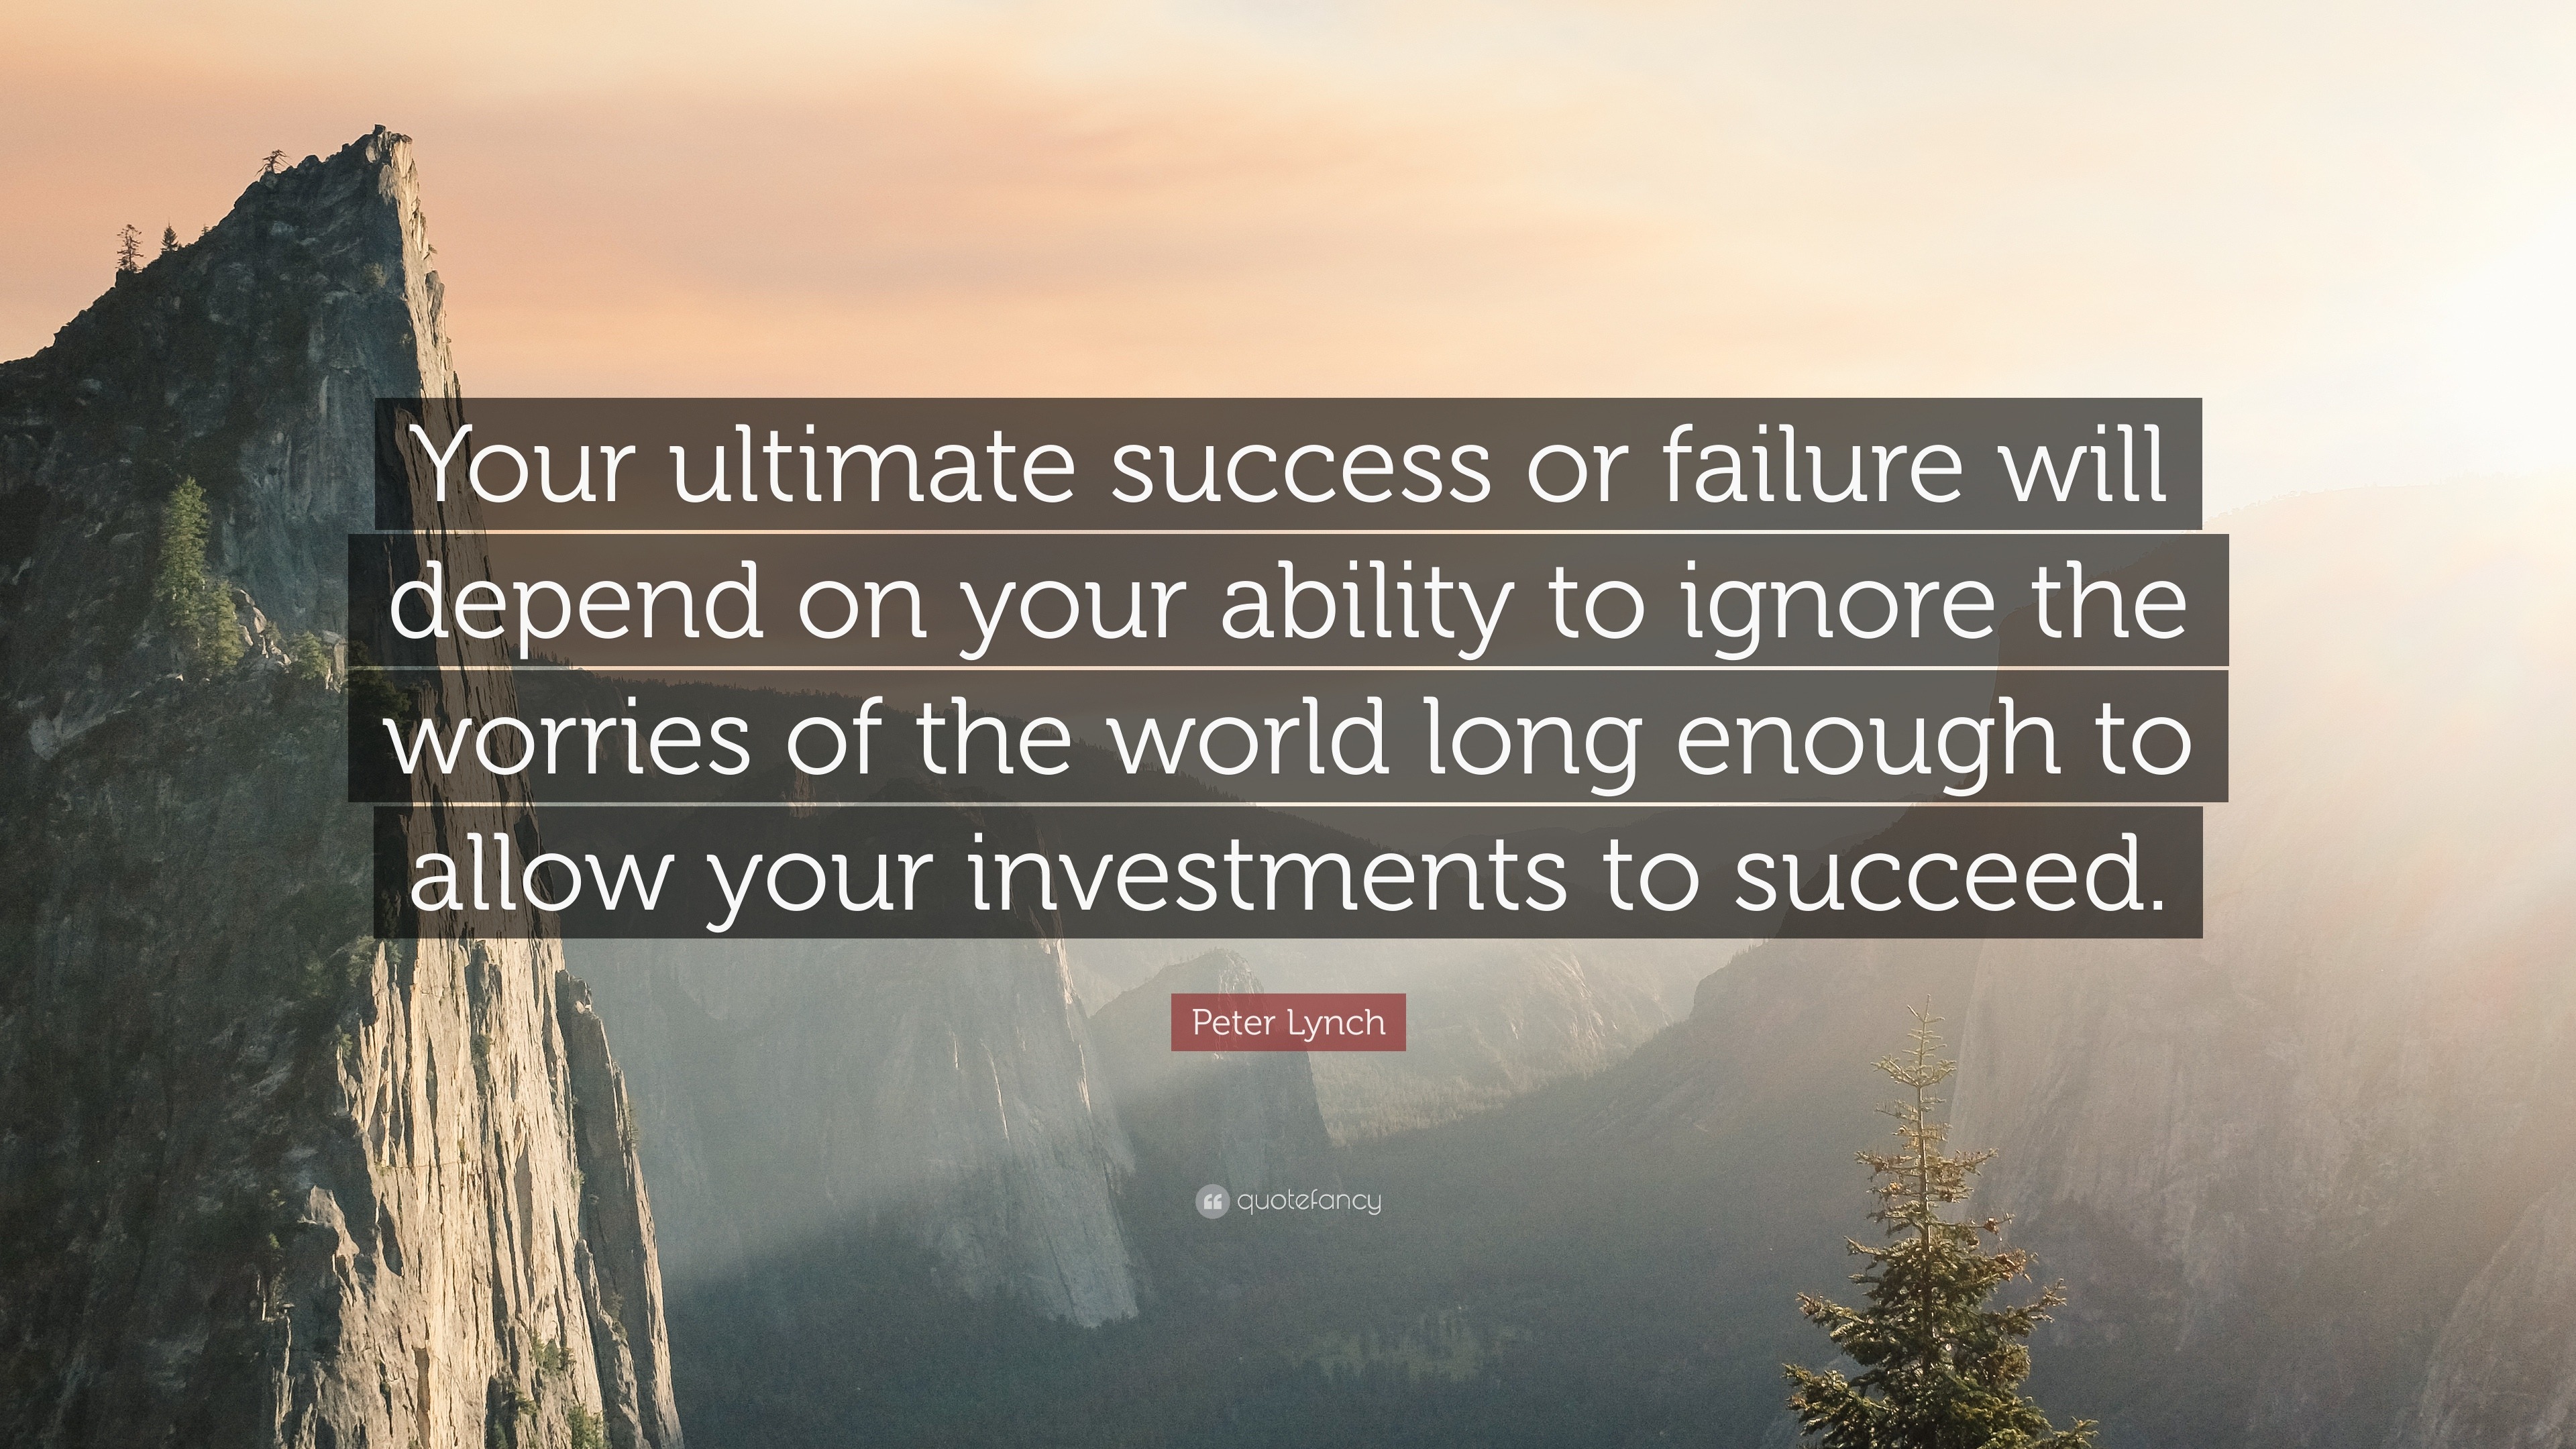 Peter Lynch Quote: “Your ultimate success or failure will depend on ...